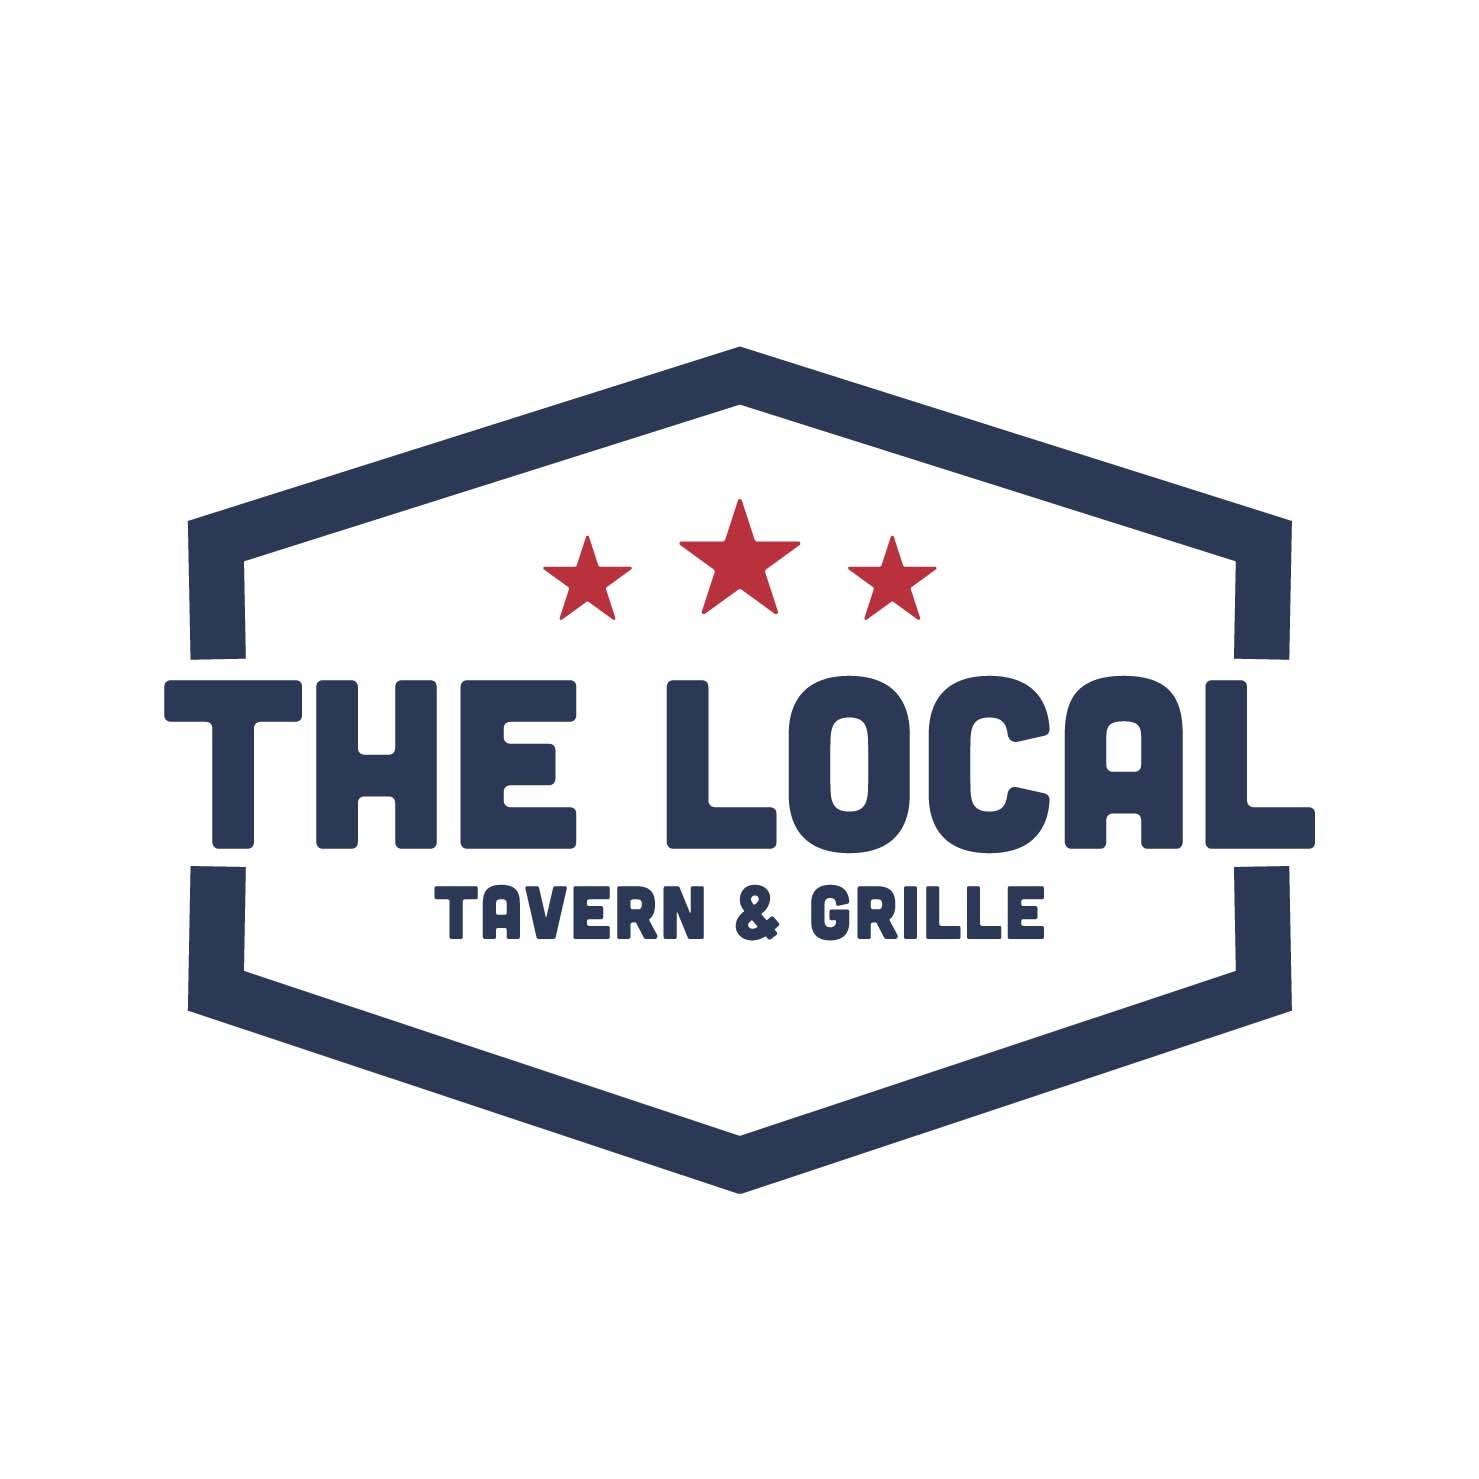 The Local Tavern & Grille